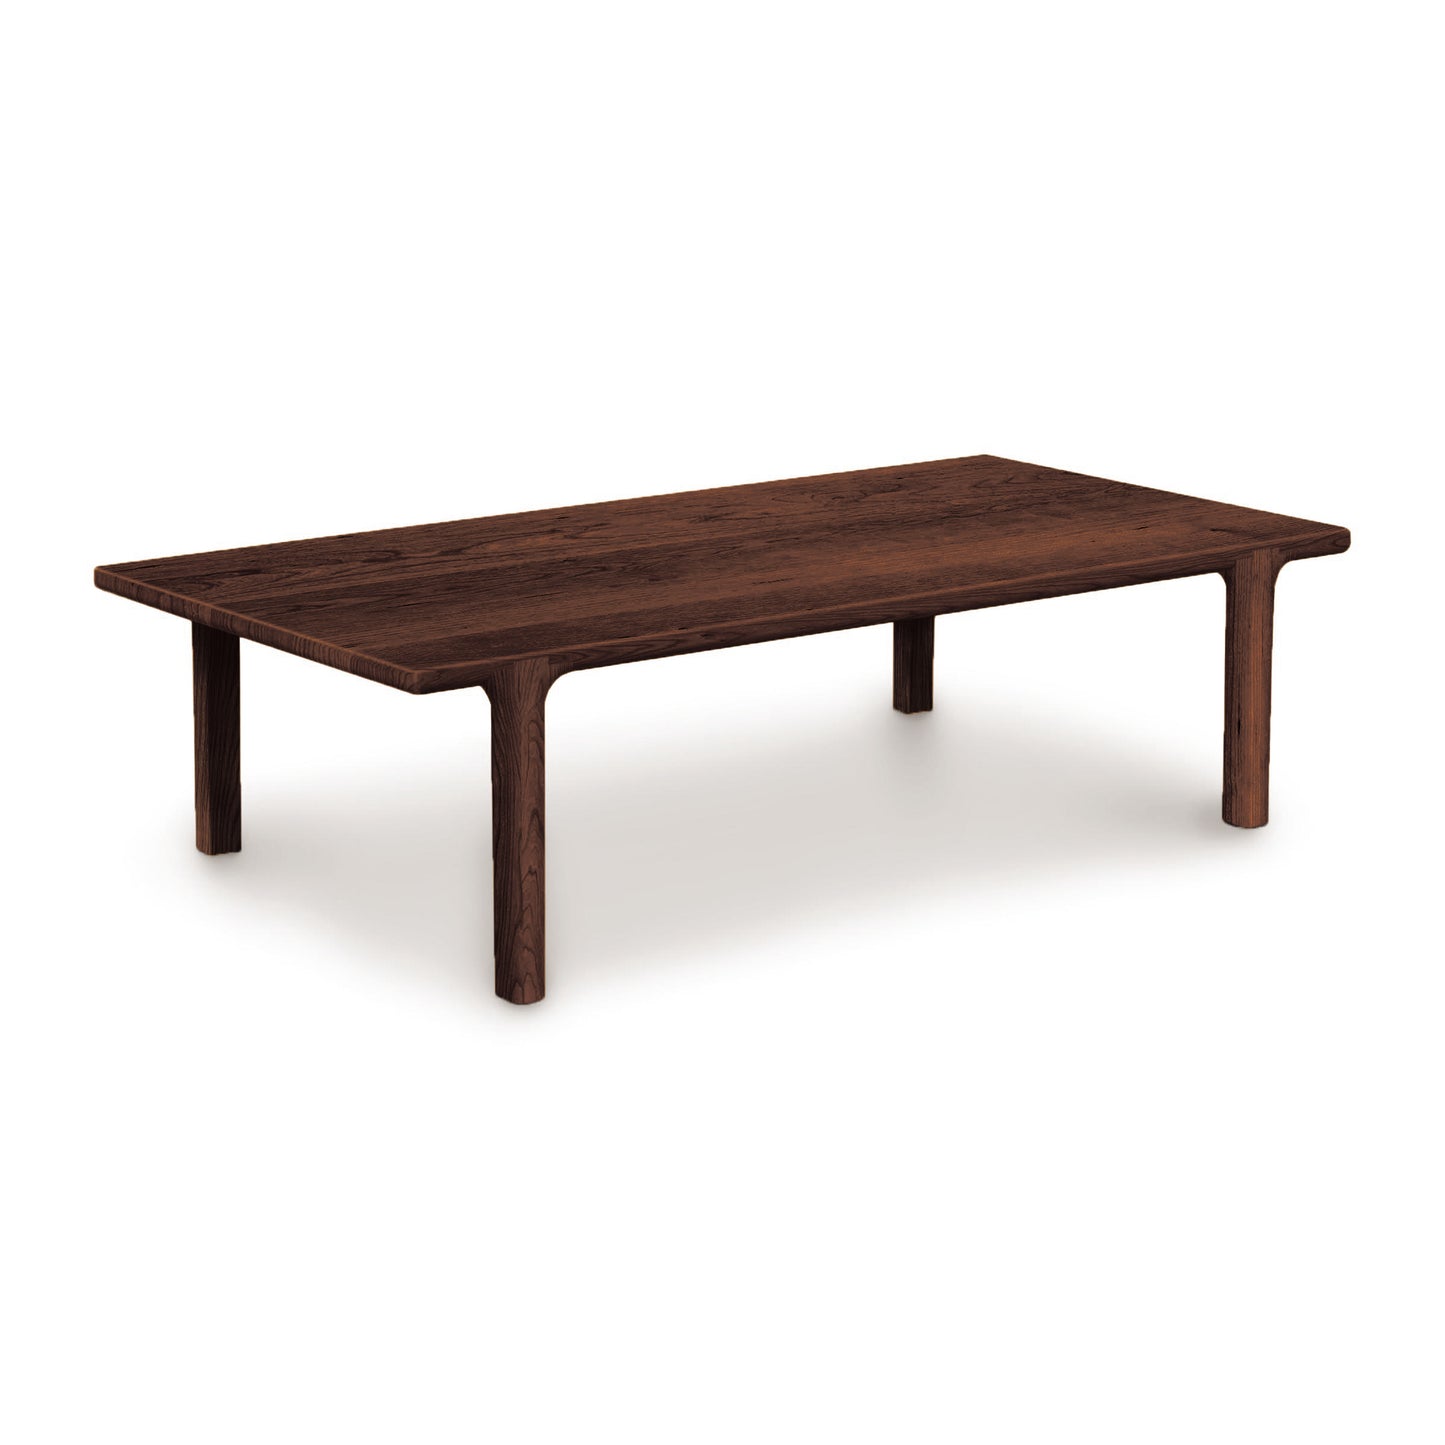 A Sierra Rectangular Coffee Table by Copeland Furniture with wood finishes for the top and legs.